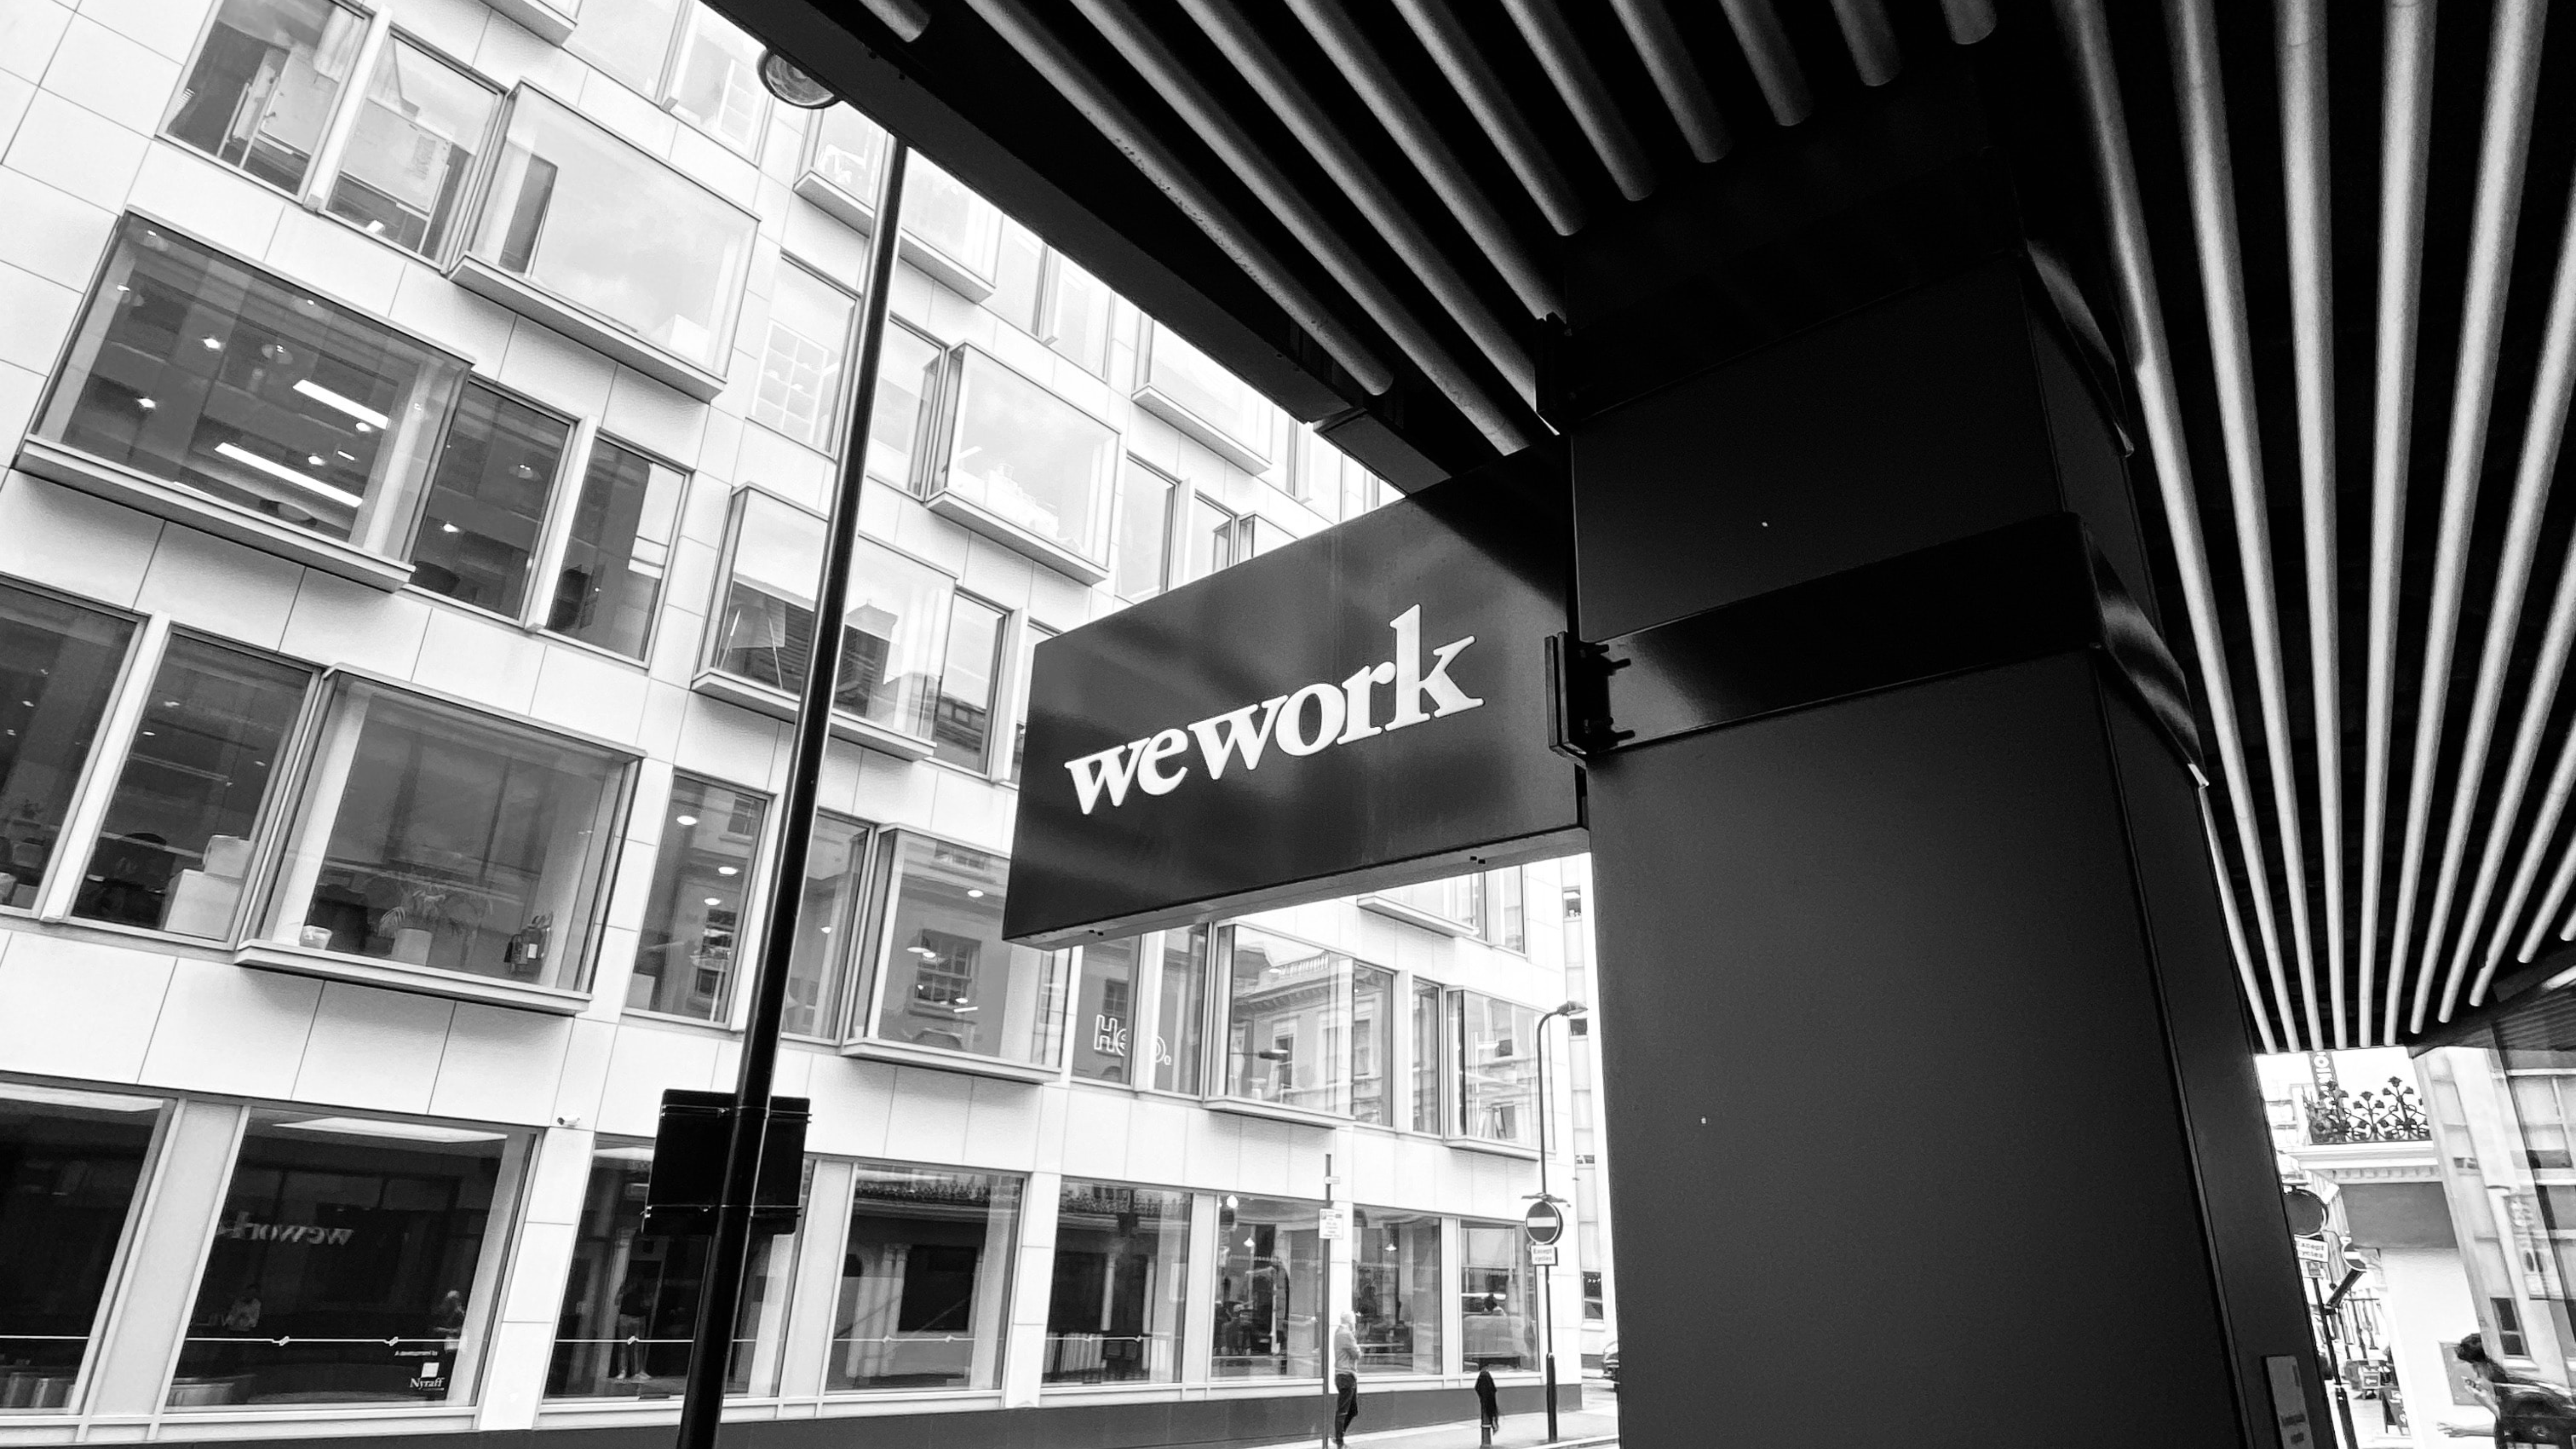 Black and white street with a wework sign